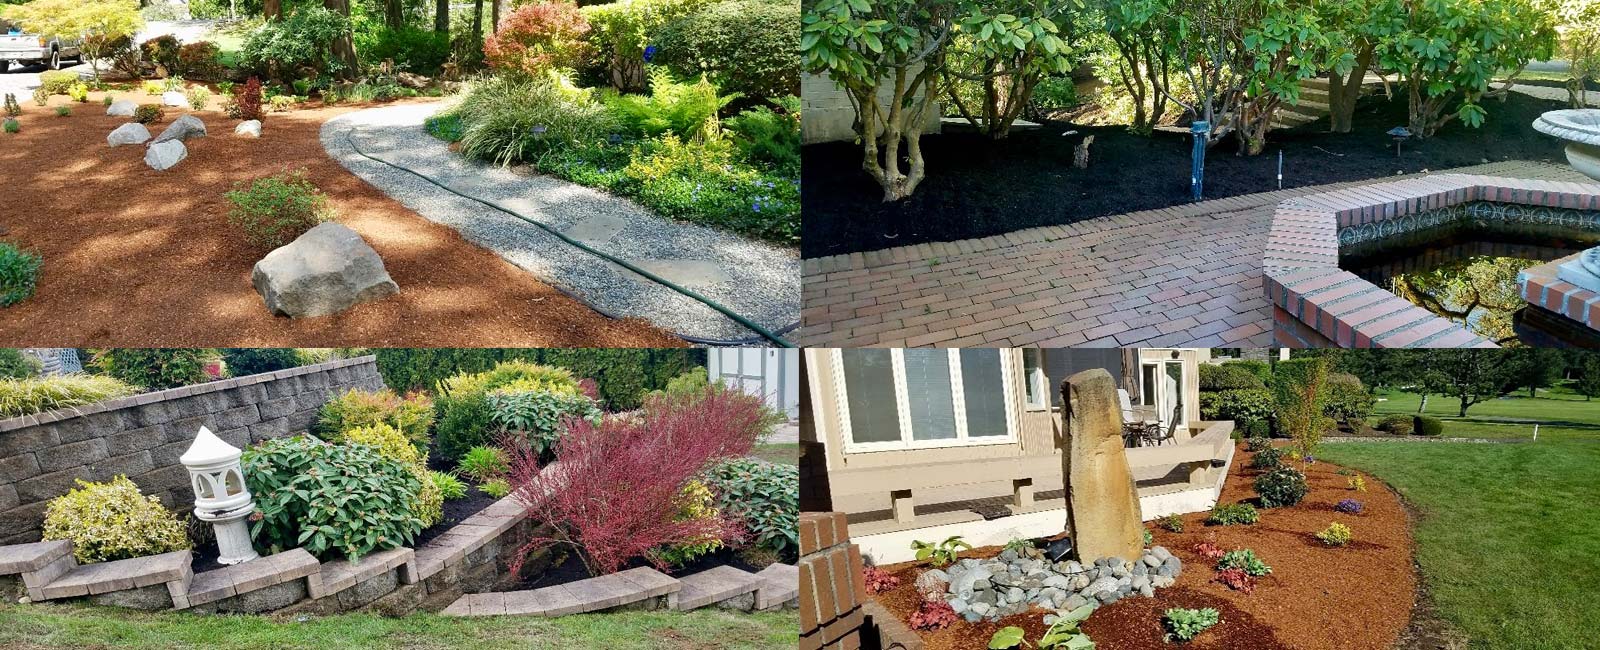 Guardian Landscape Services - Landscaping and Yard Maintenance